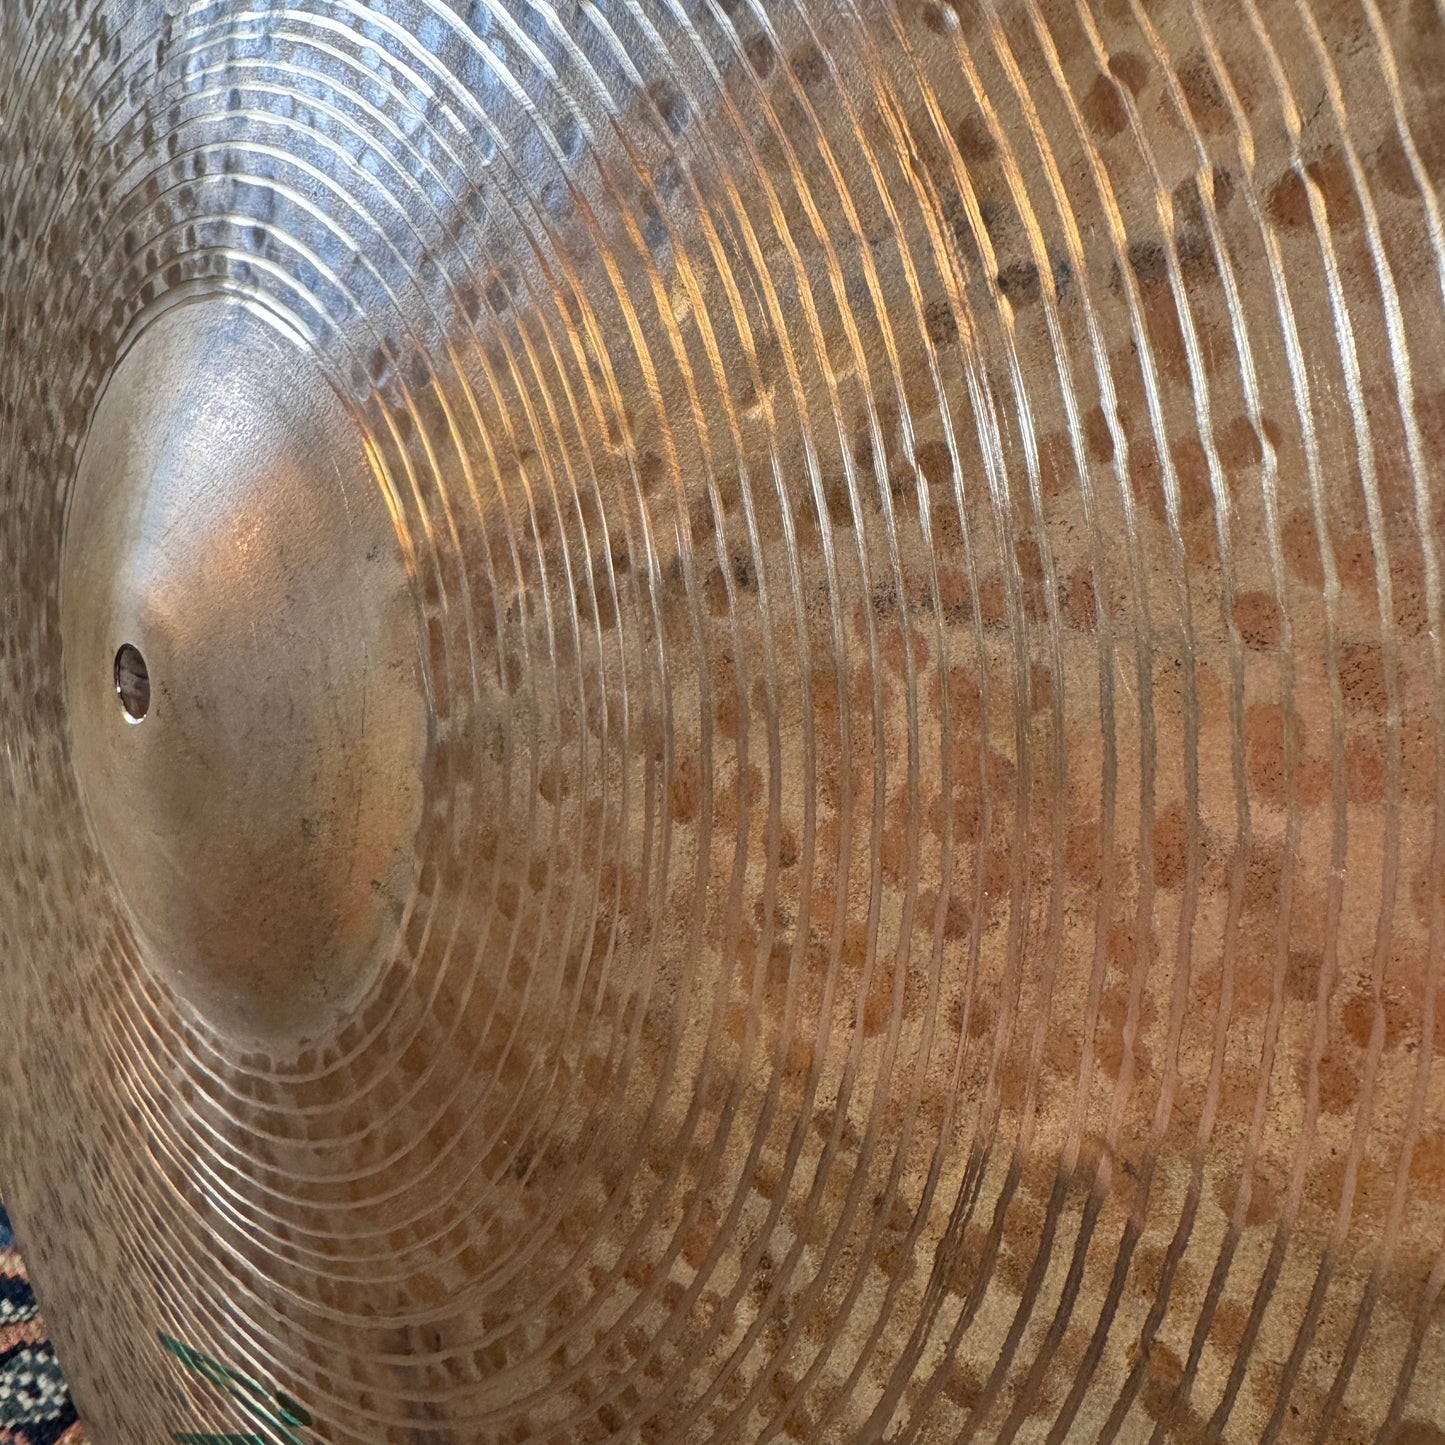 22" Istanbul Agop Signature Ride Cymbal 2118g *Video Demo*